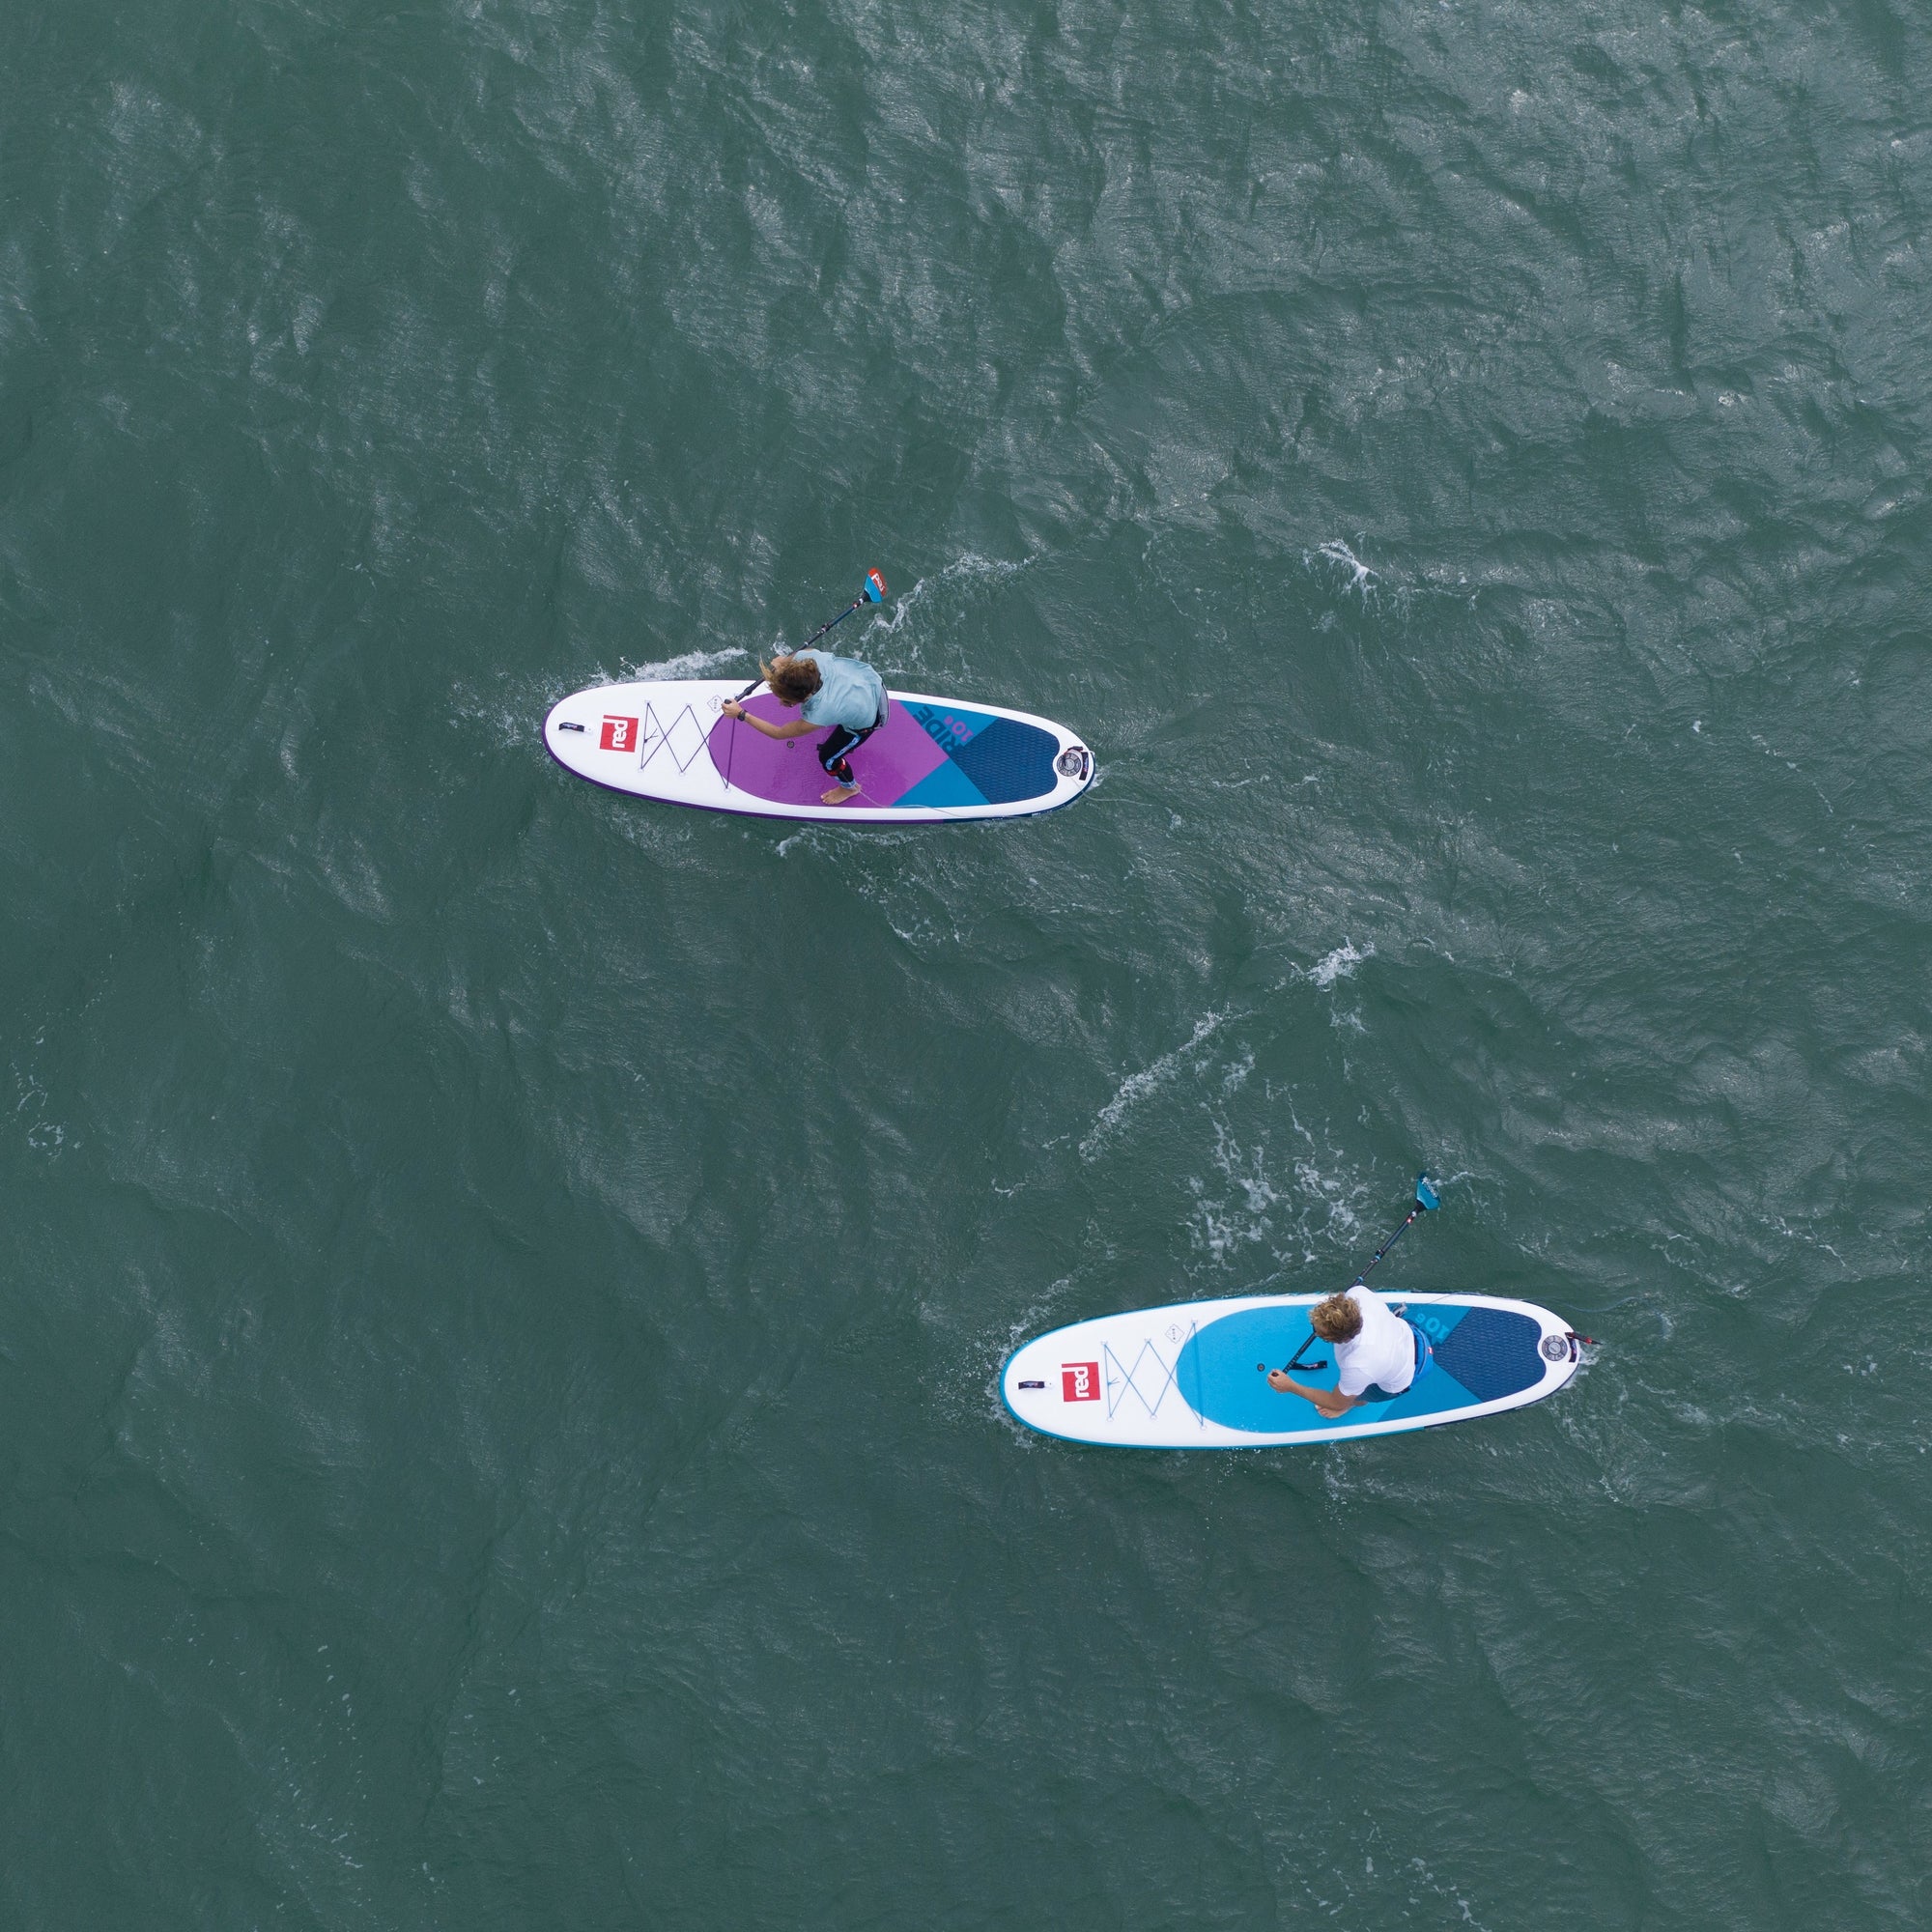 1.5 Hour Stand Up paddle PRIVATE LESSON. $95 SOLO / $150 DUO/$240 Groups up to 4ppl